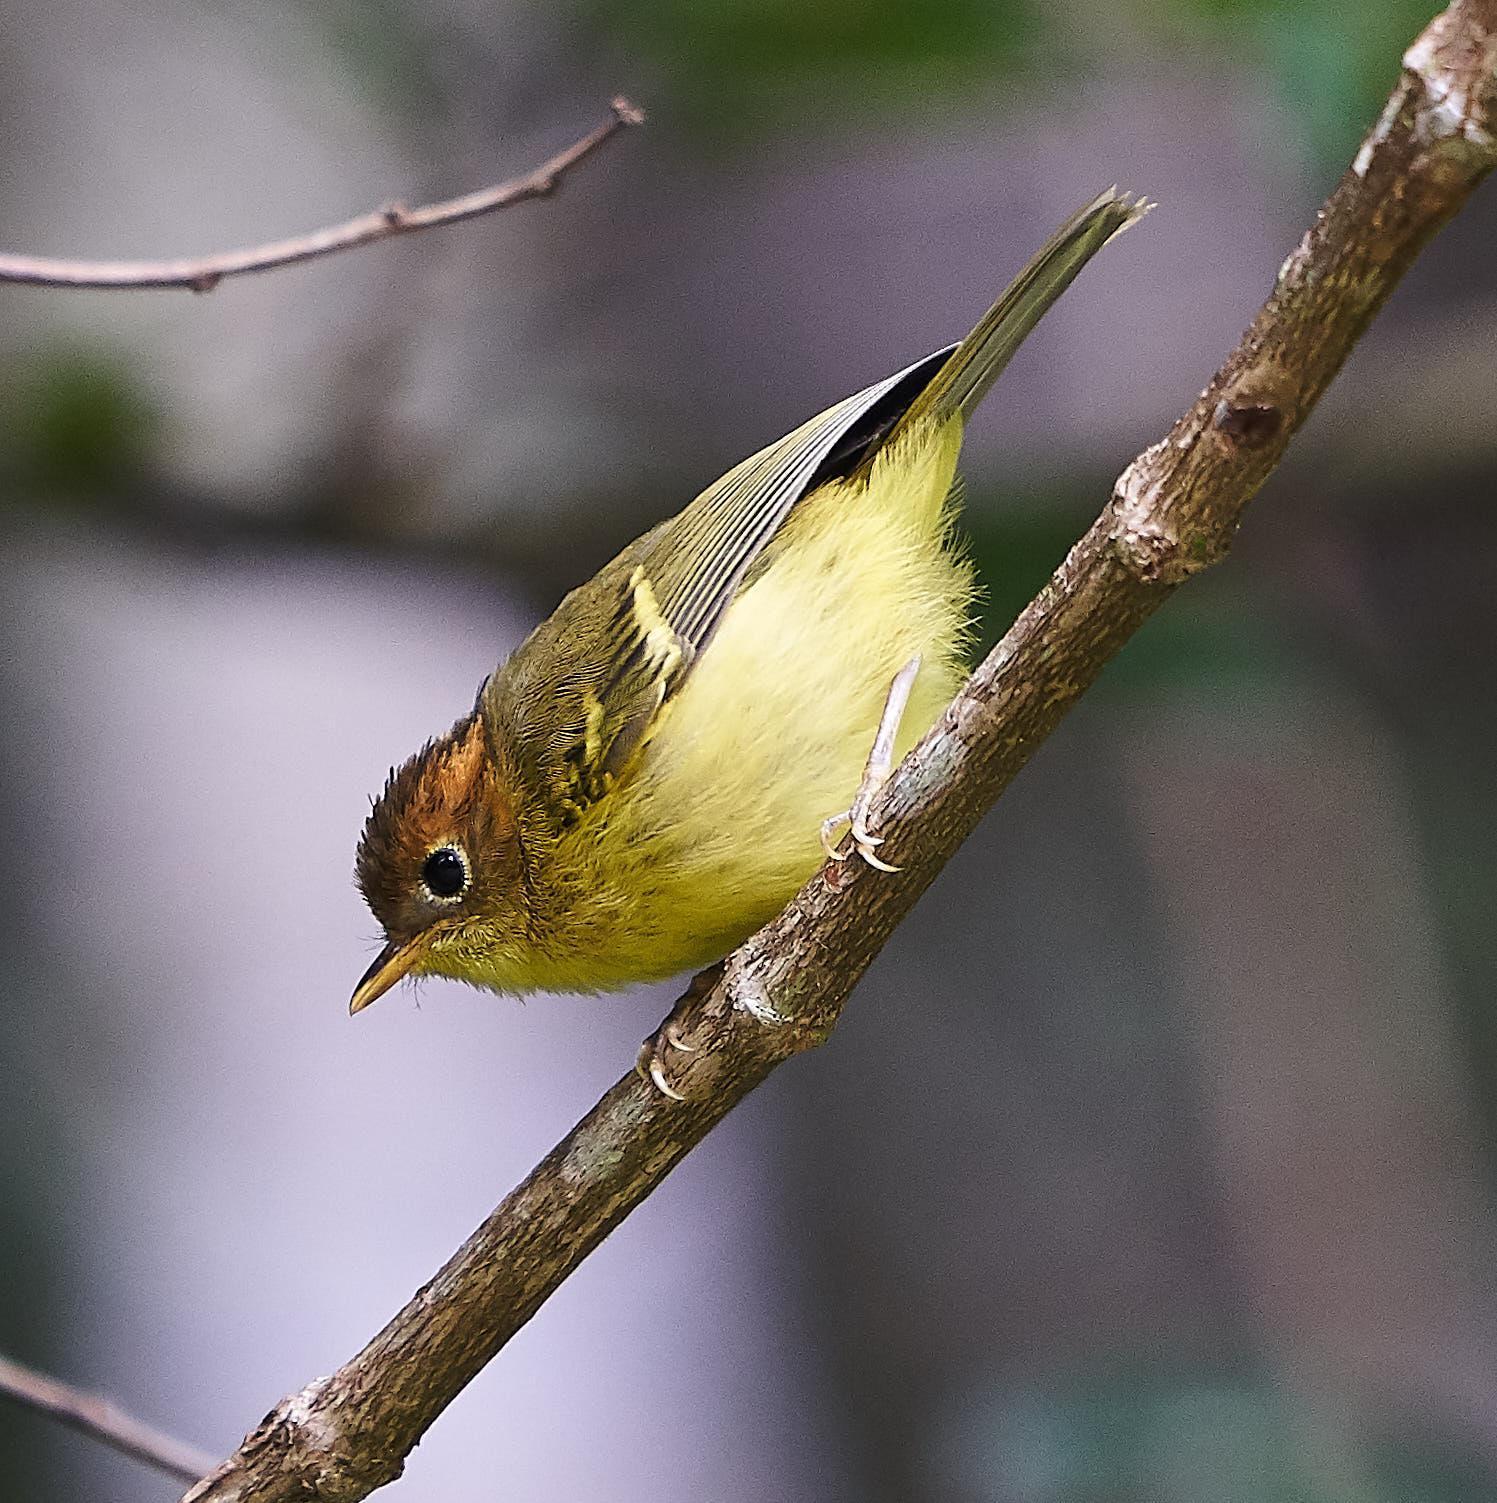 Yellow-breasted Warbler Photo by Steven Cheong